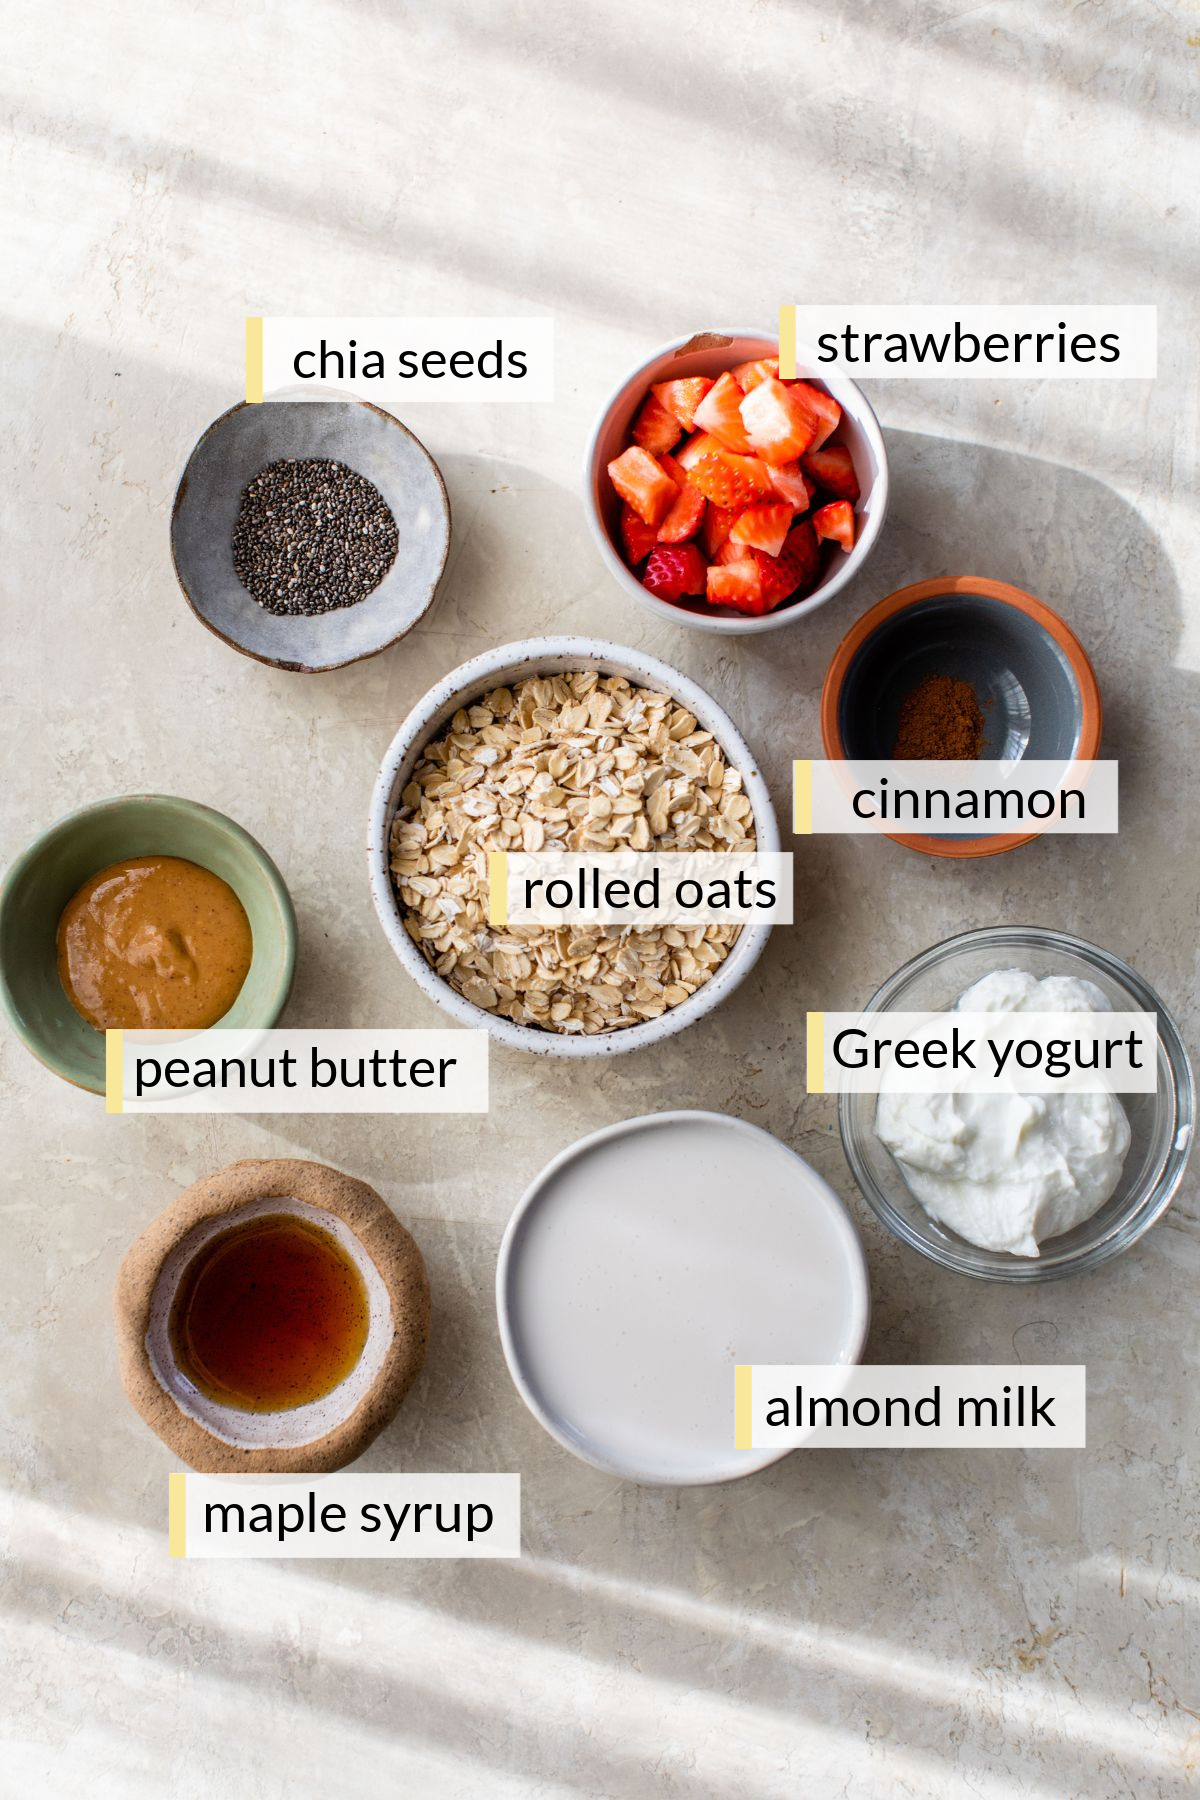 Ingredients for making strawberry overnight oats divided into small bowls.